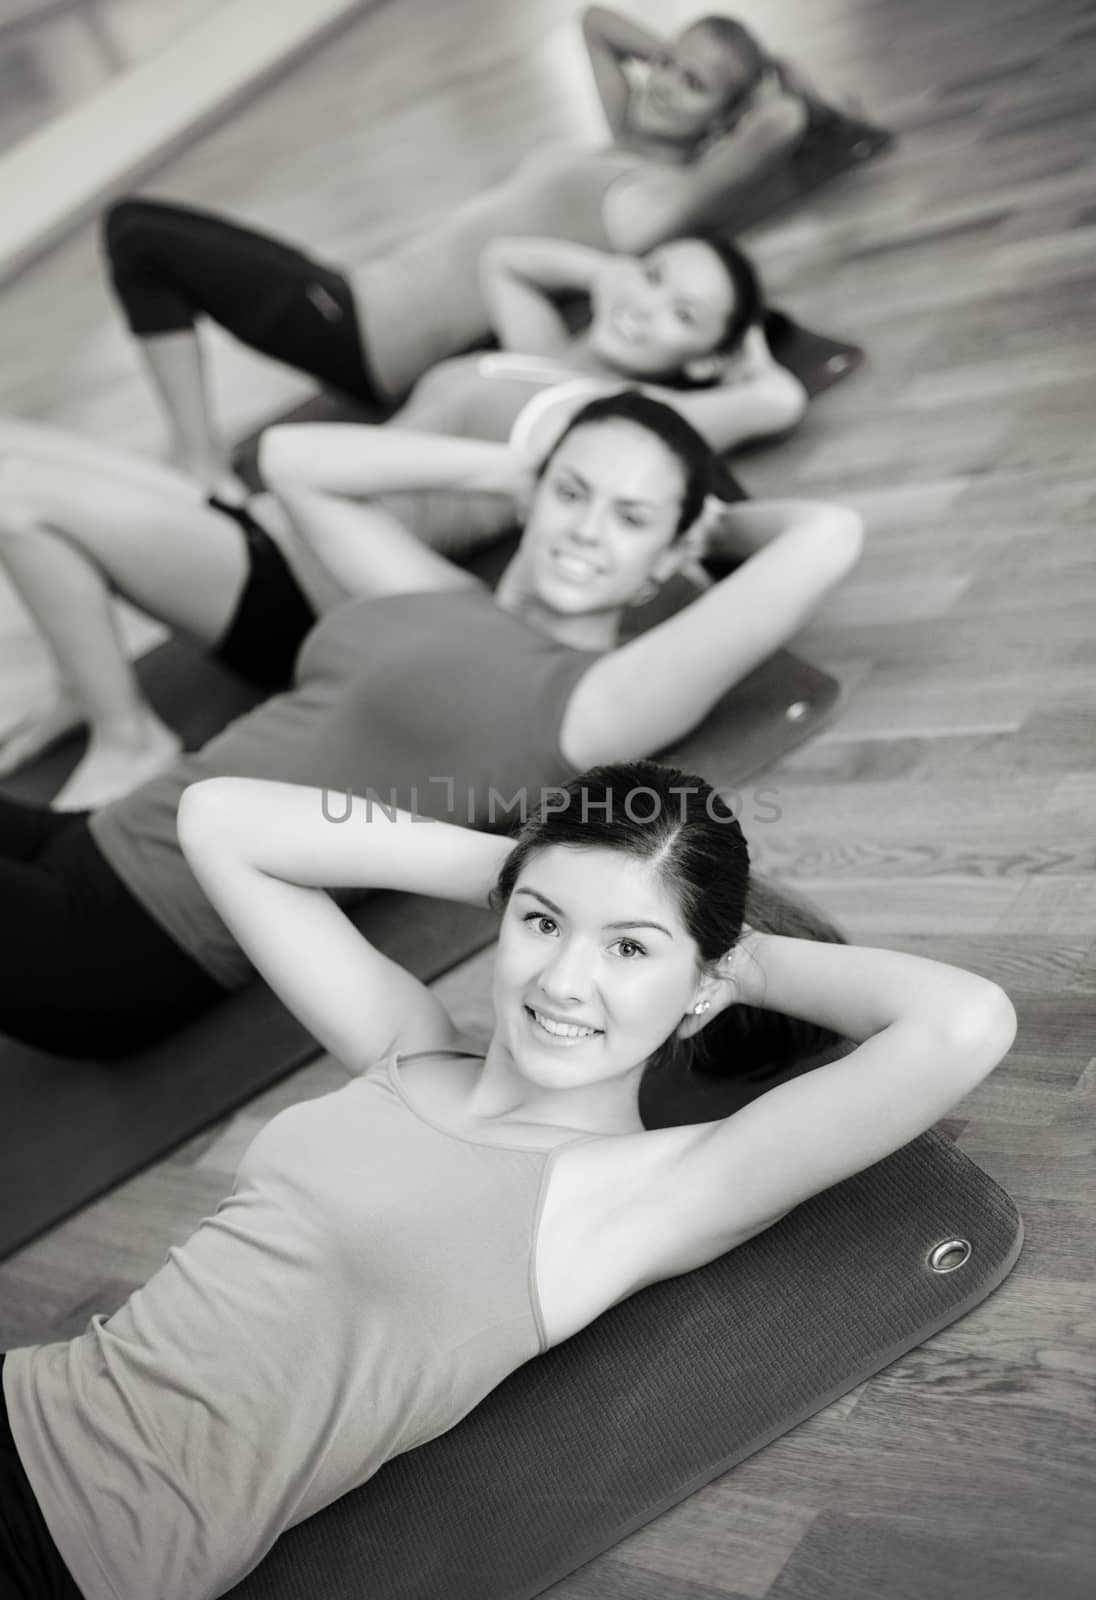 fitness, sport, training, gym and lifestyle concept - group of smiling women exercising on mats in the gym